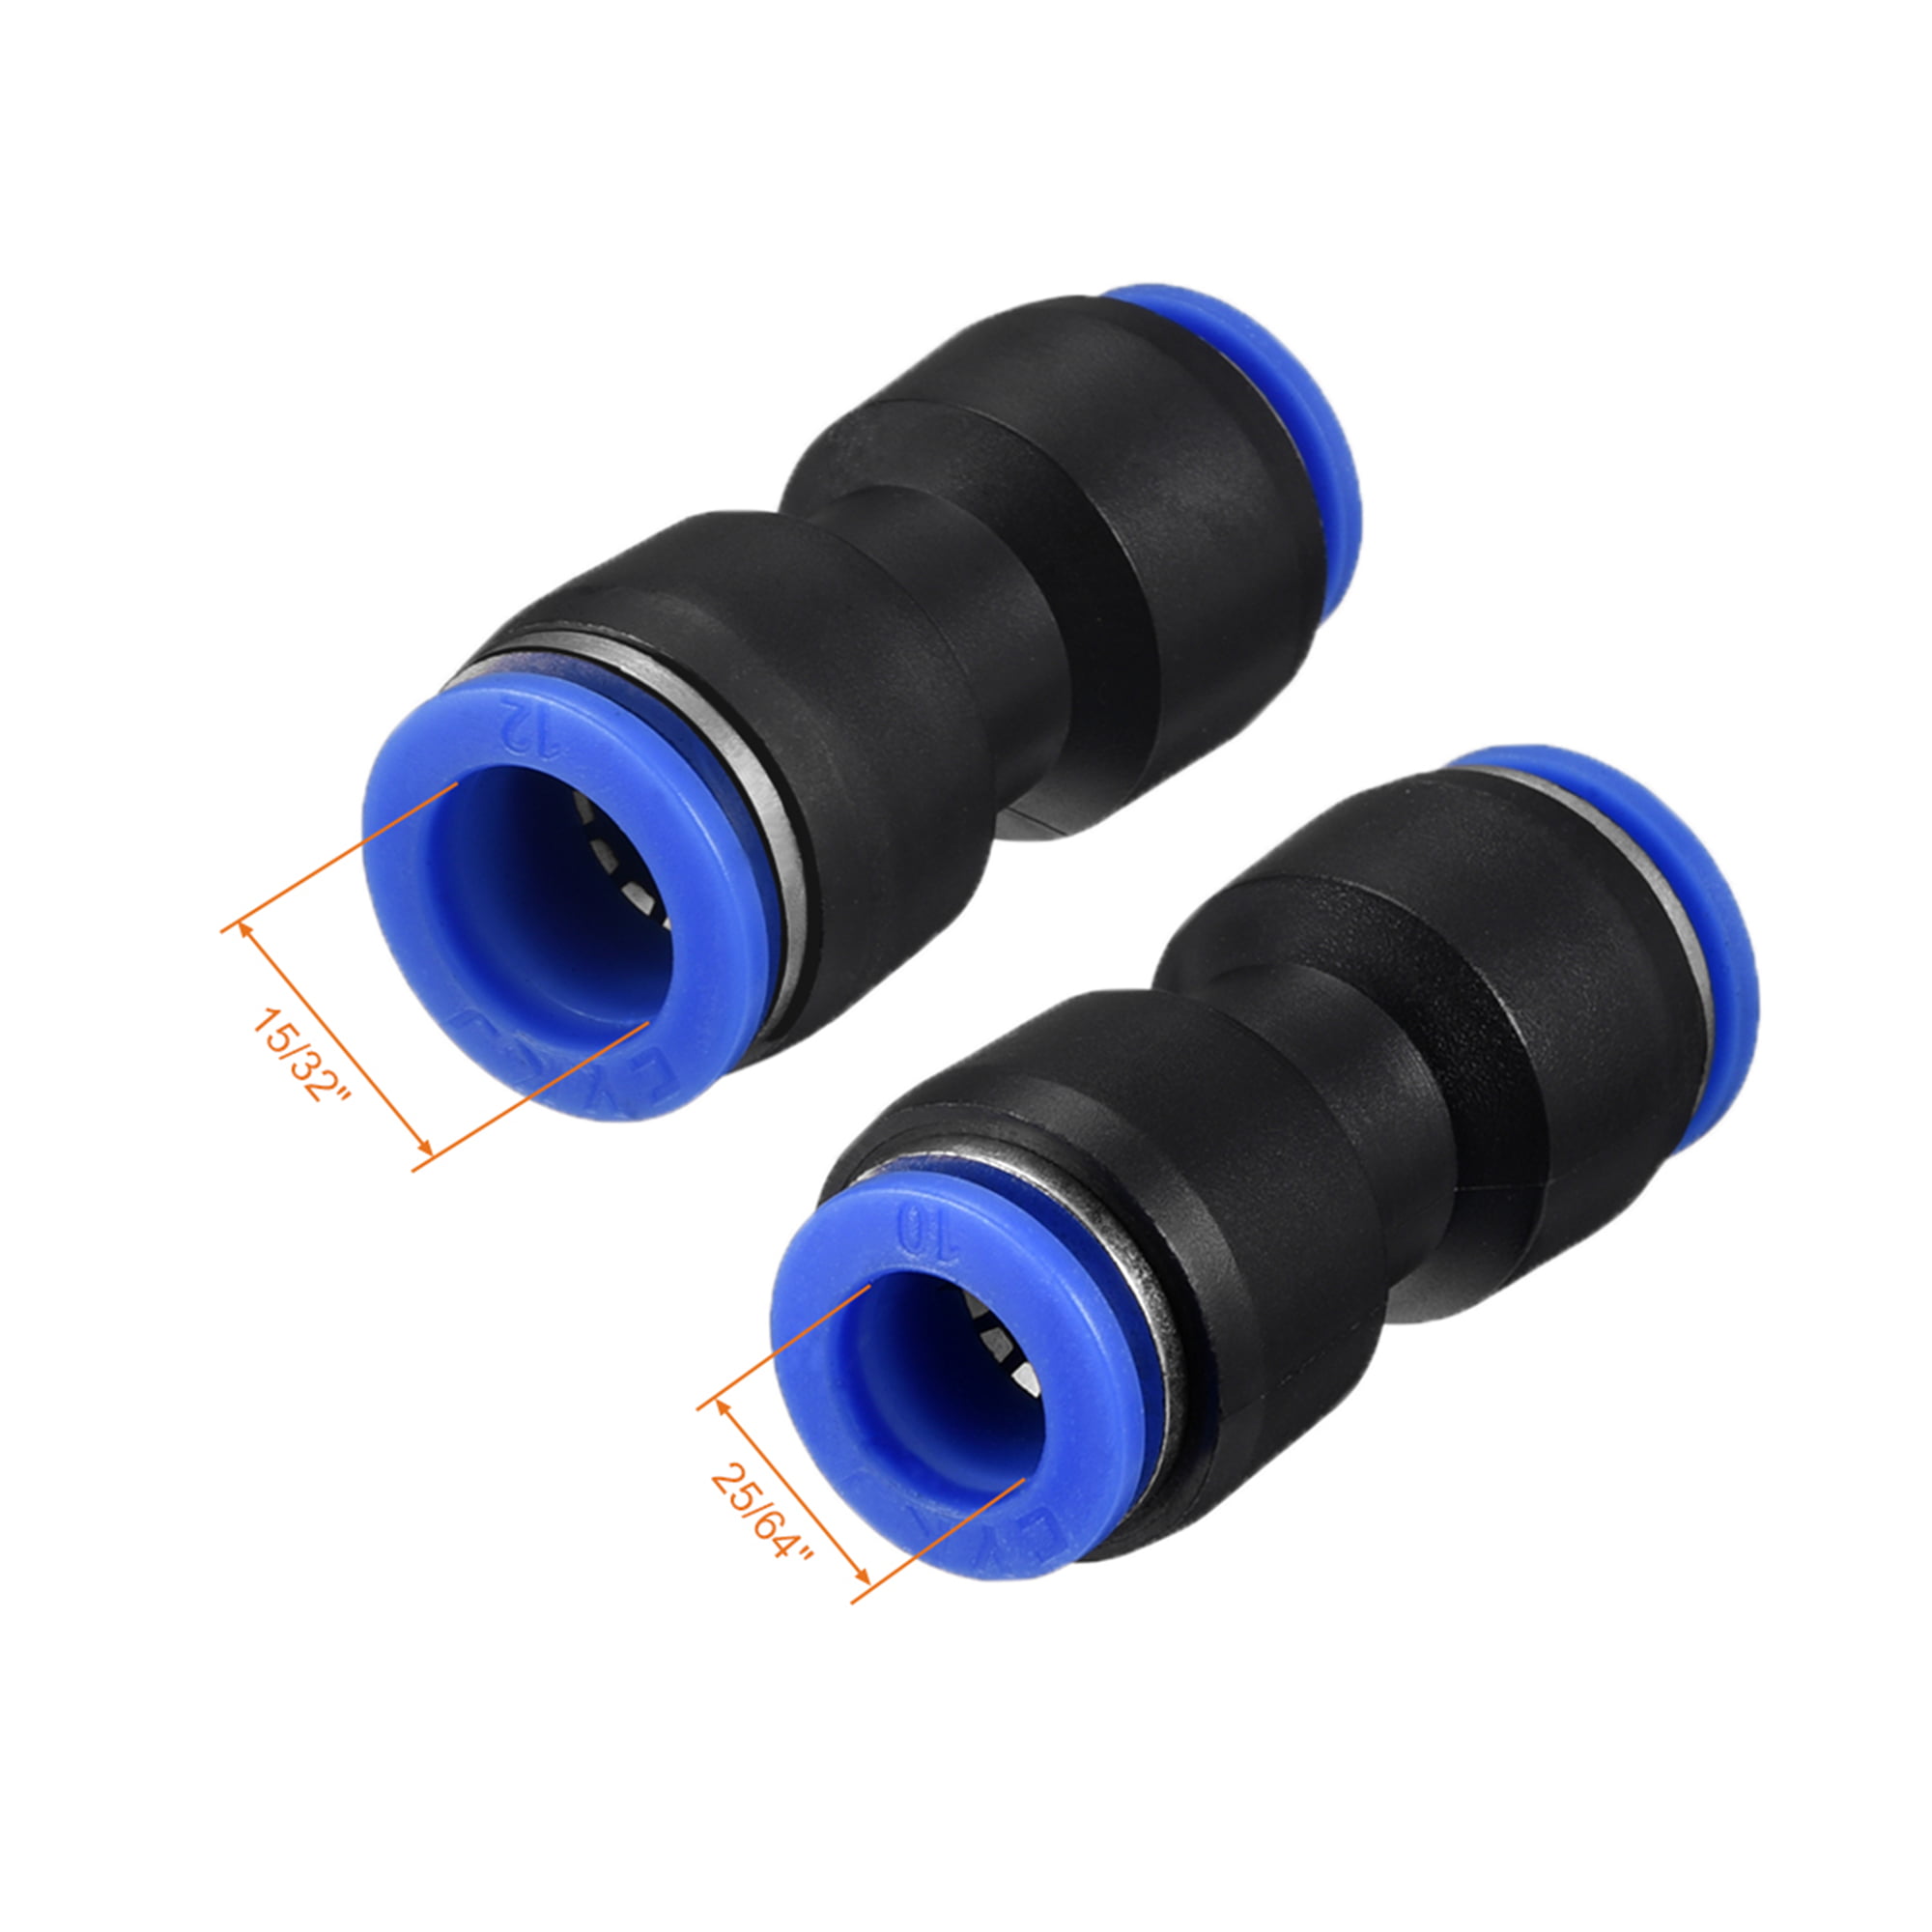 4mm Push in equal Straight Connector for Pneumatics or Fluids